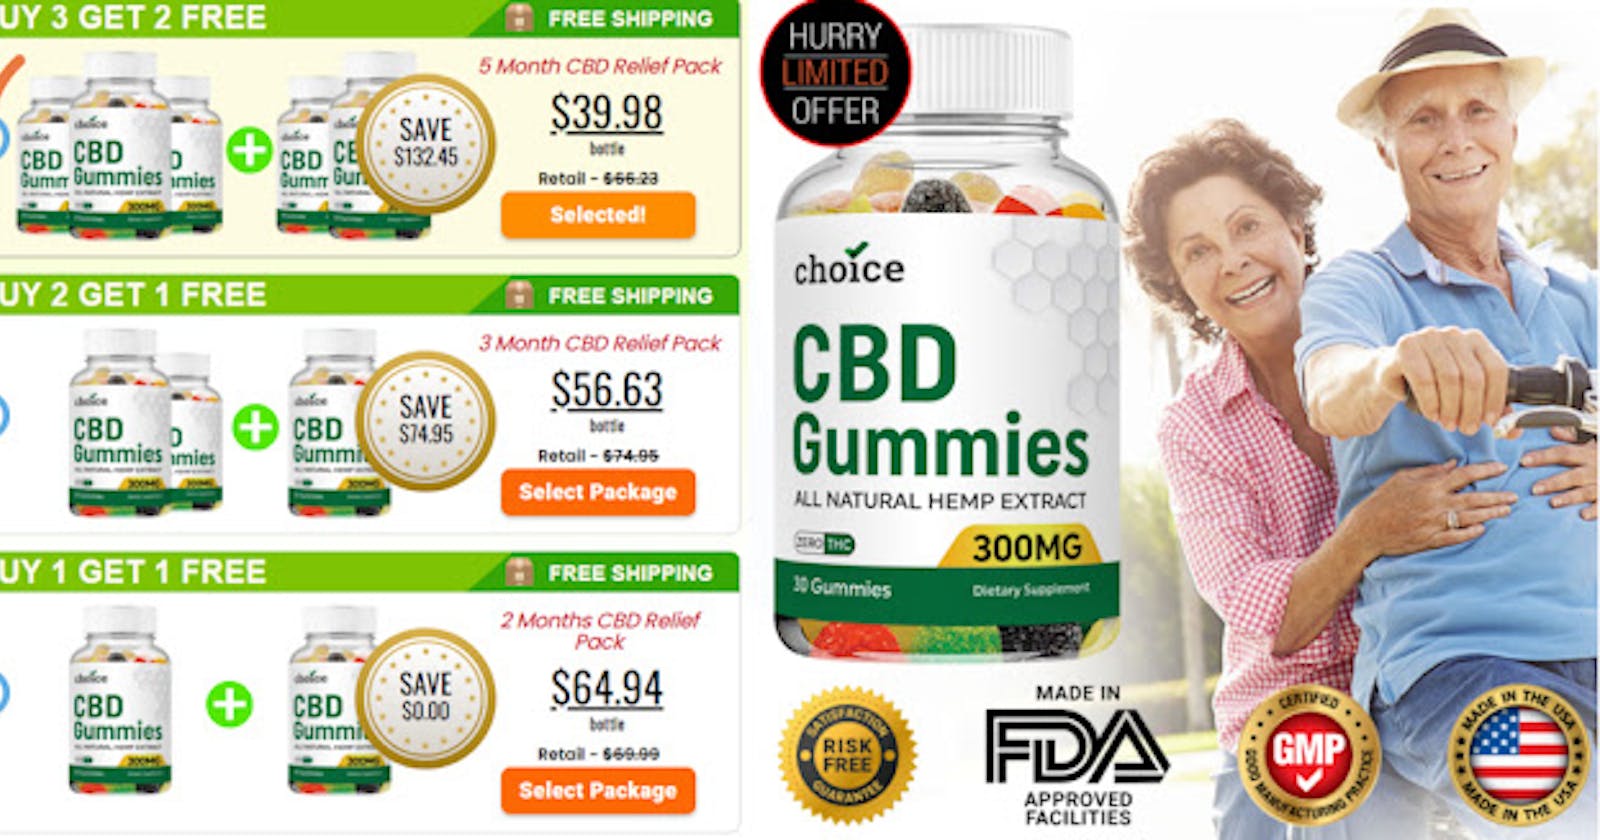 Choice CBD gummies - Pain Relief Reviews, Benefits, Uses And Results?